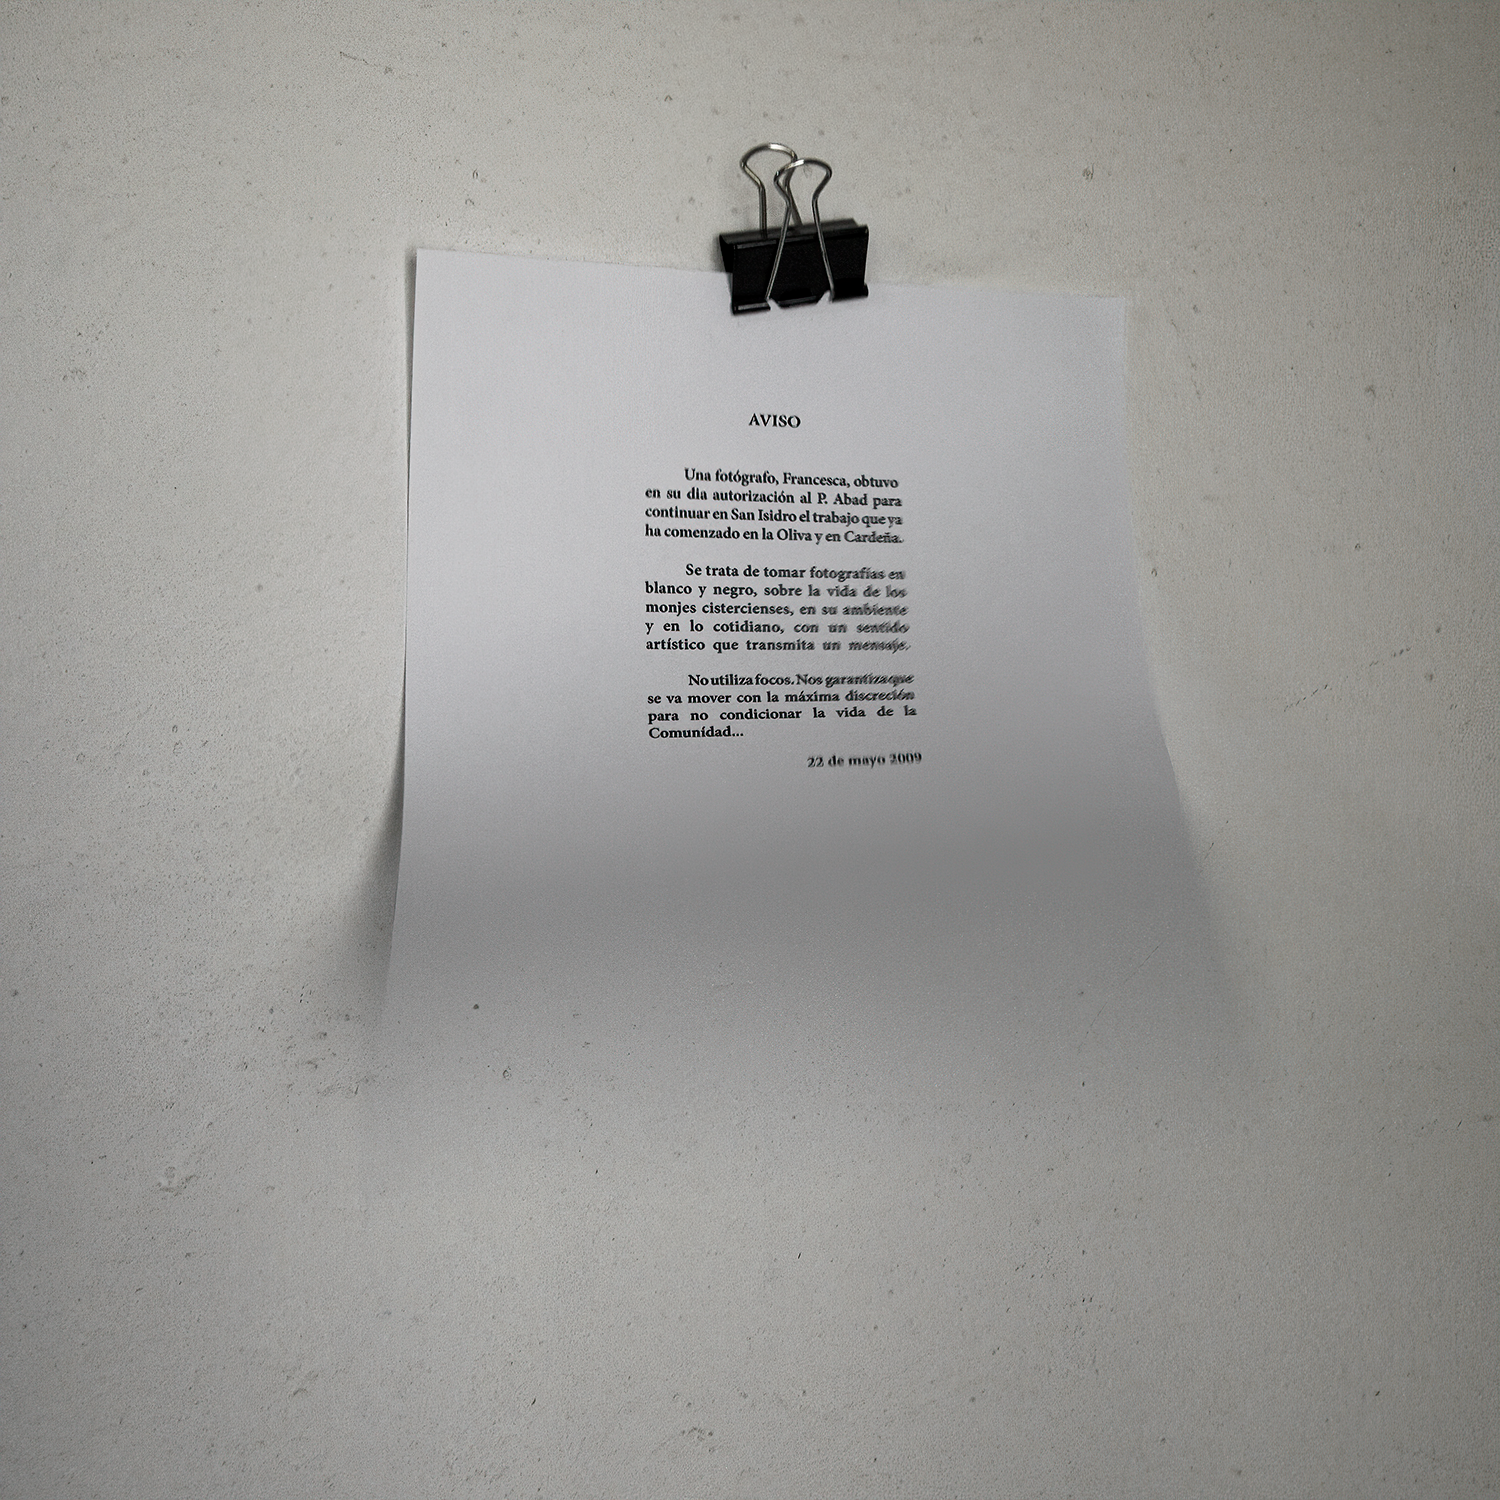 Photograph by Francesca Phillips, a notice put up by the Abbot informing the monks about the project White Monks: A Life in Shadows